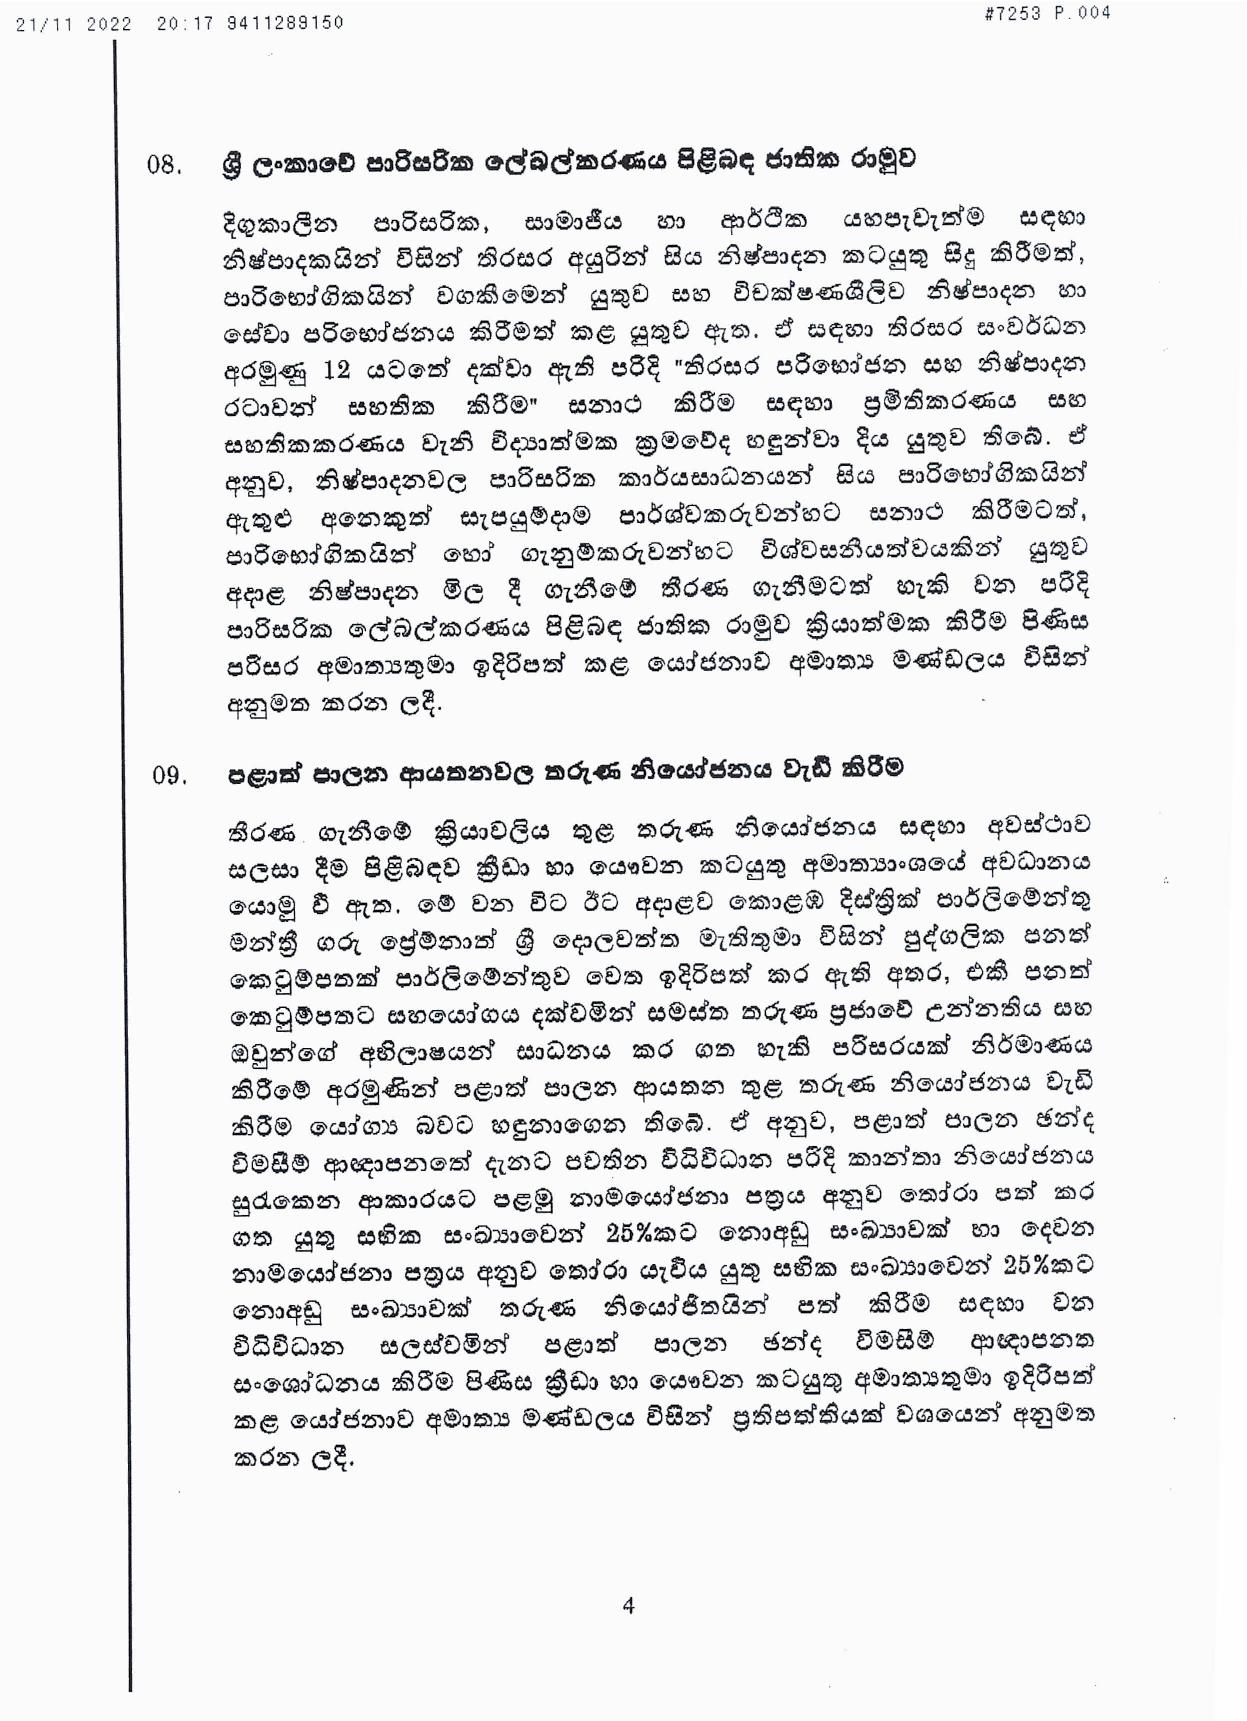 Cabinet Decision on 21.11.2022 page 004